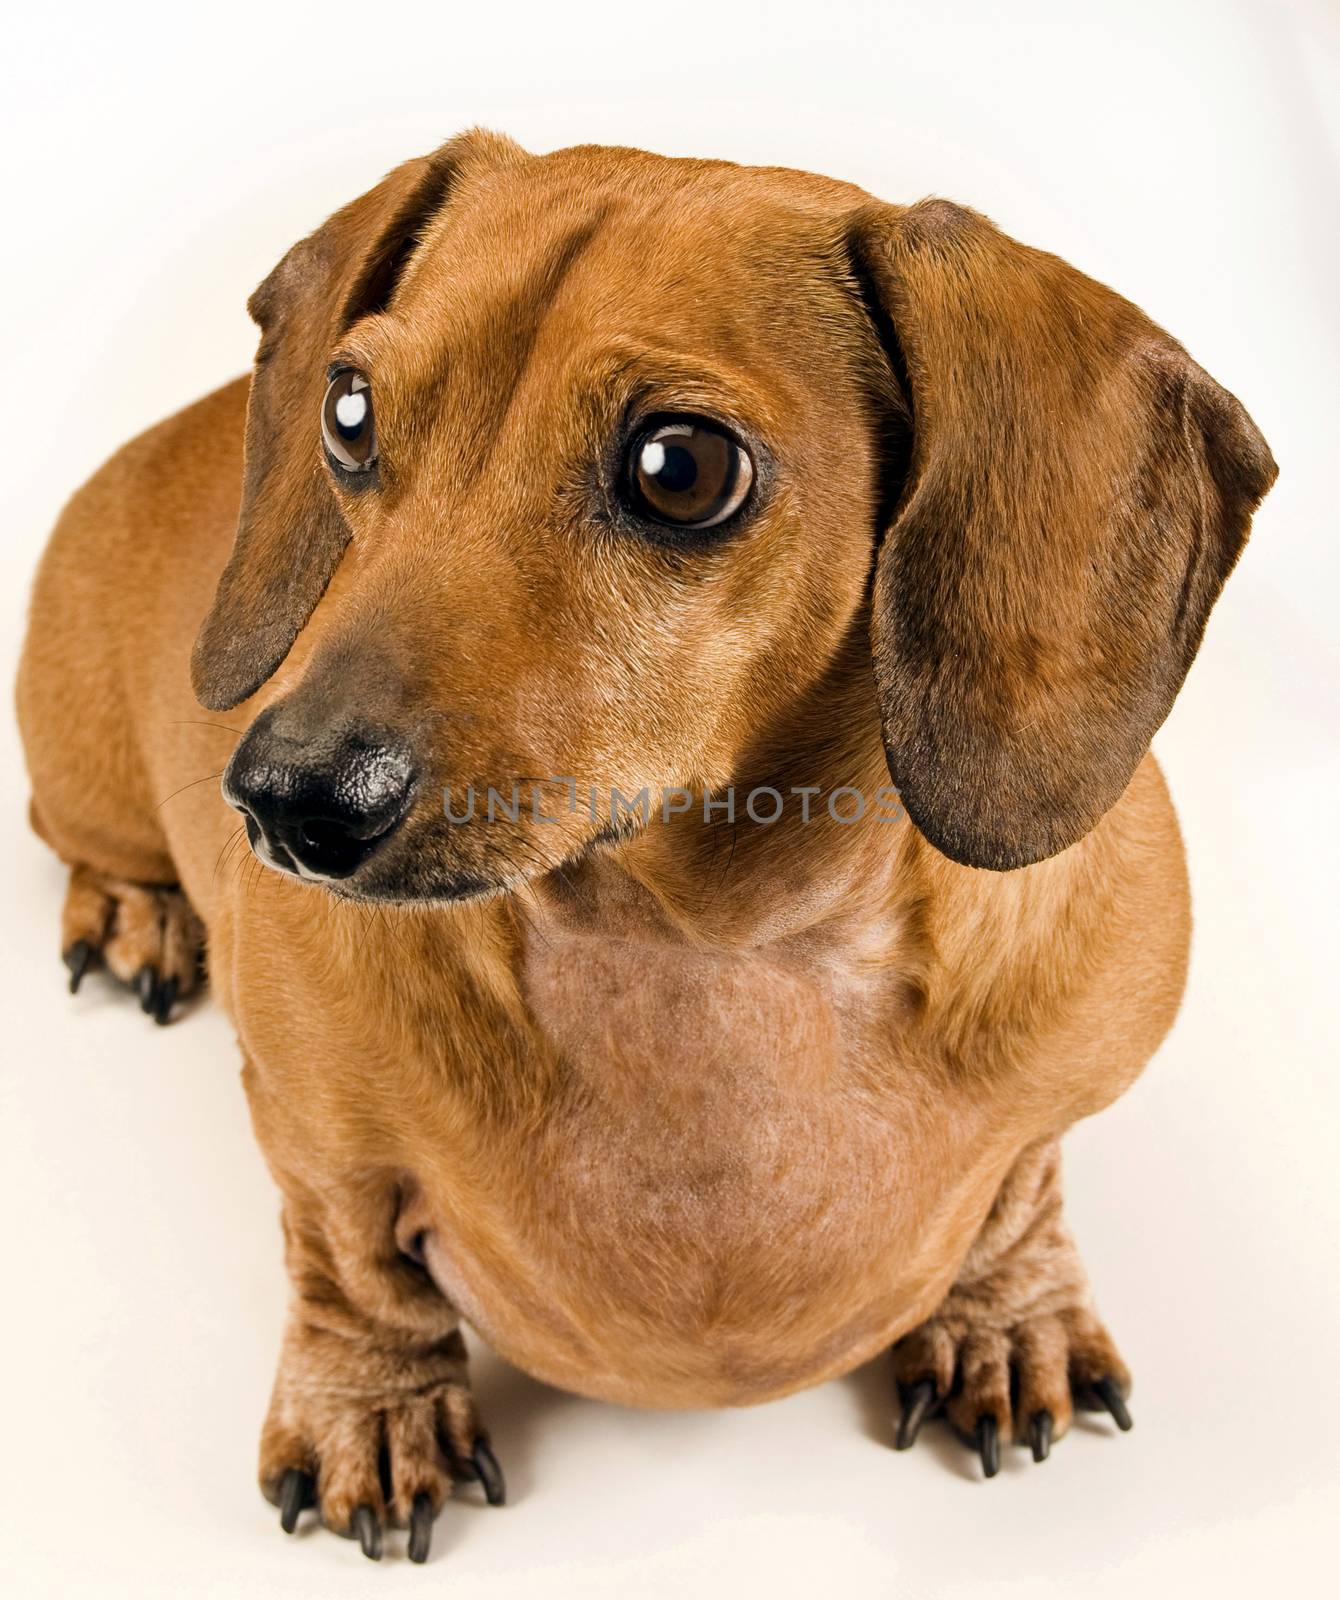 Cute Dachshund Dog On White Background by stockbuster1